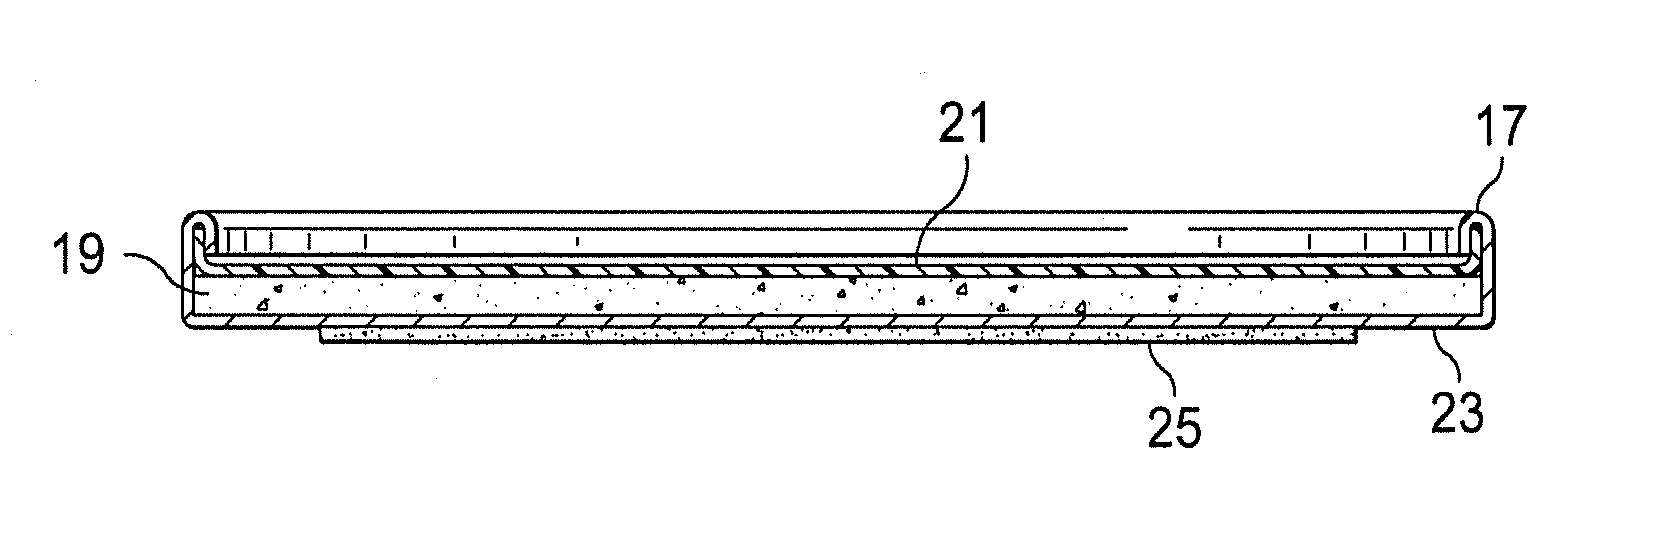 Pyrotechnic Target and Method of Manufacture